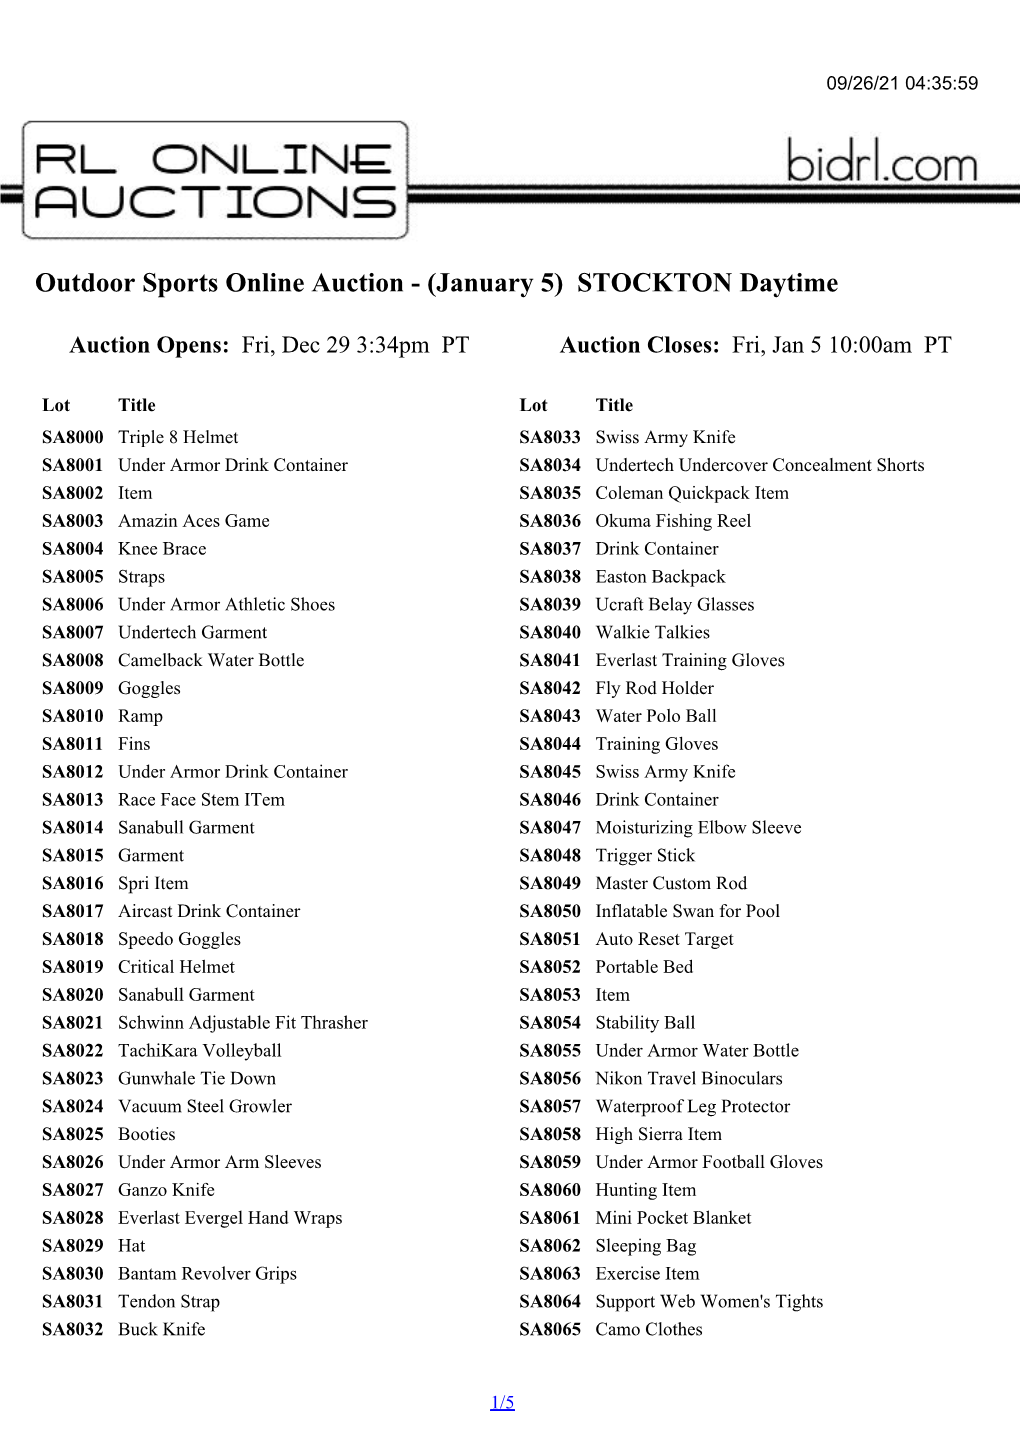 Outdoor Sports Online Auction - (January 5) STOCKTON Daytime